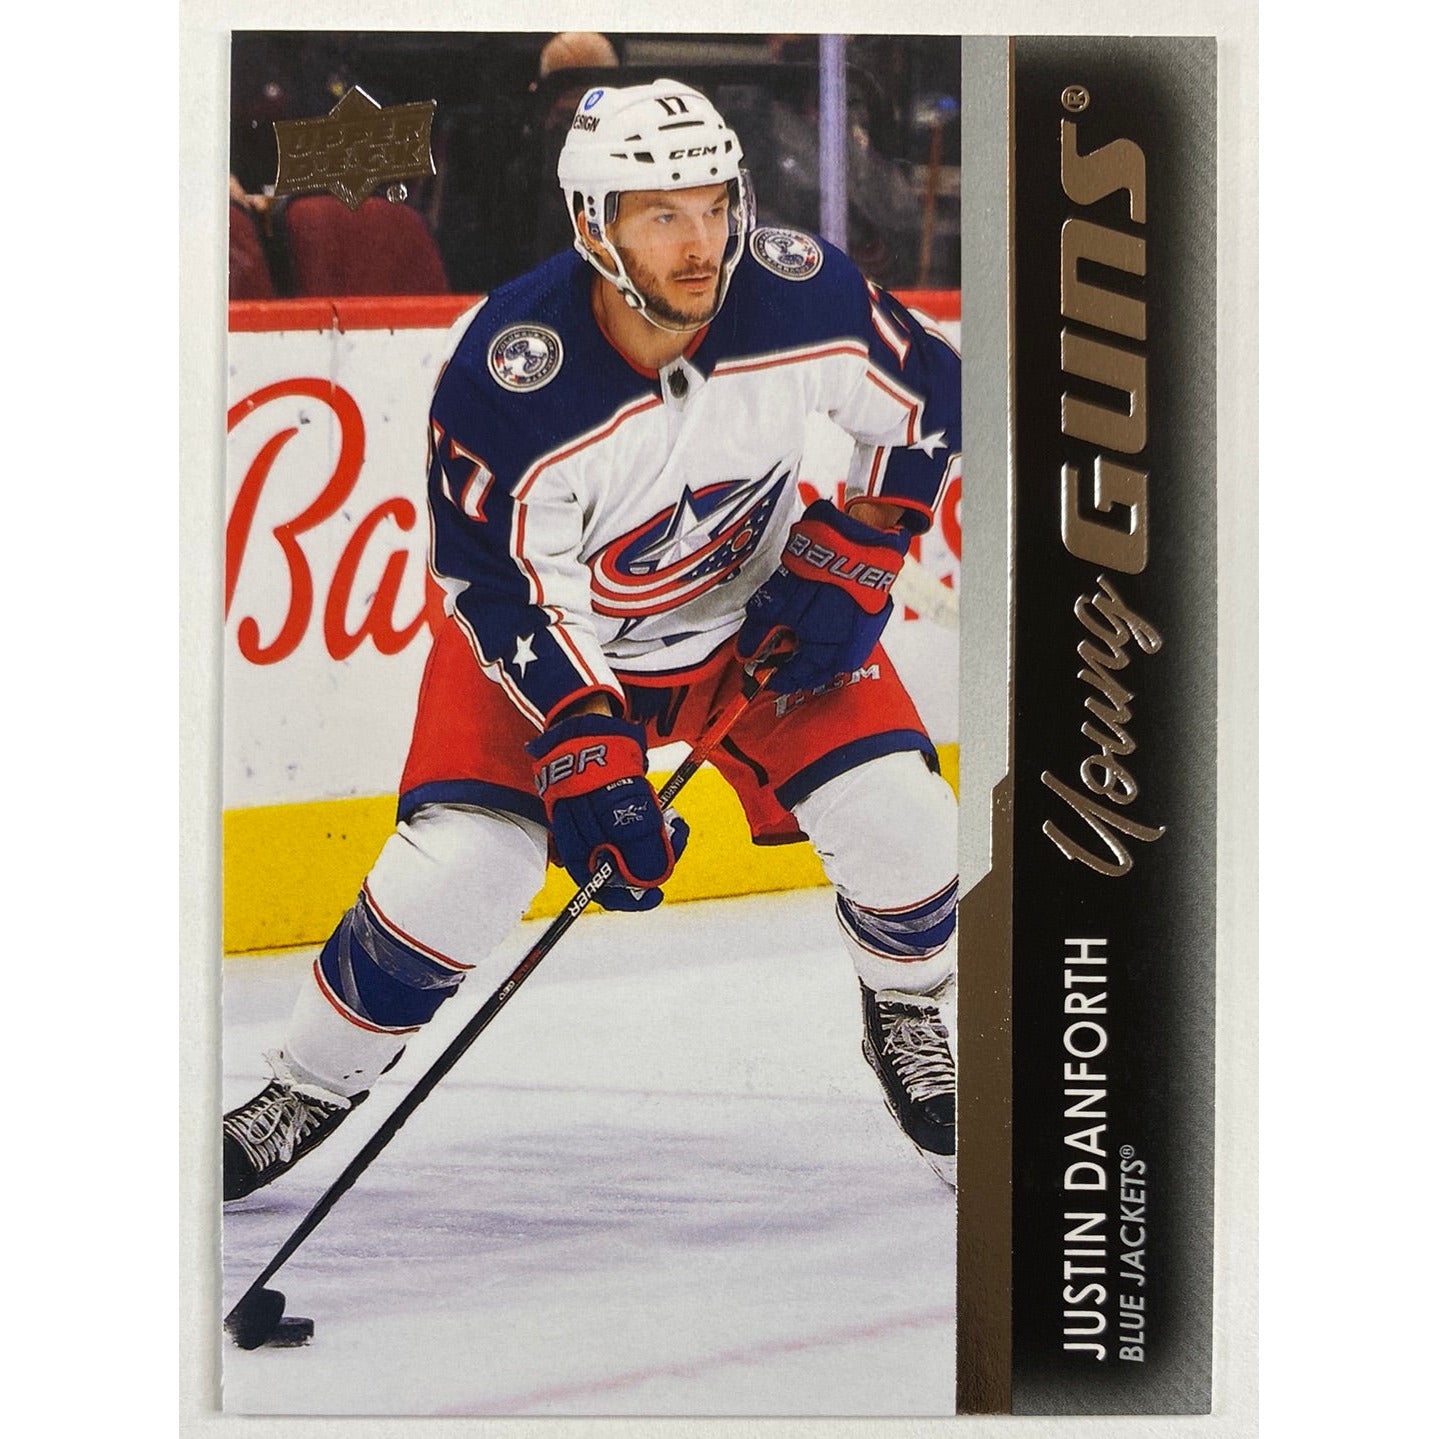 2021-22 Upper Deck Extended Series Justin Danforth Young Guns